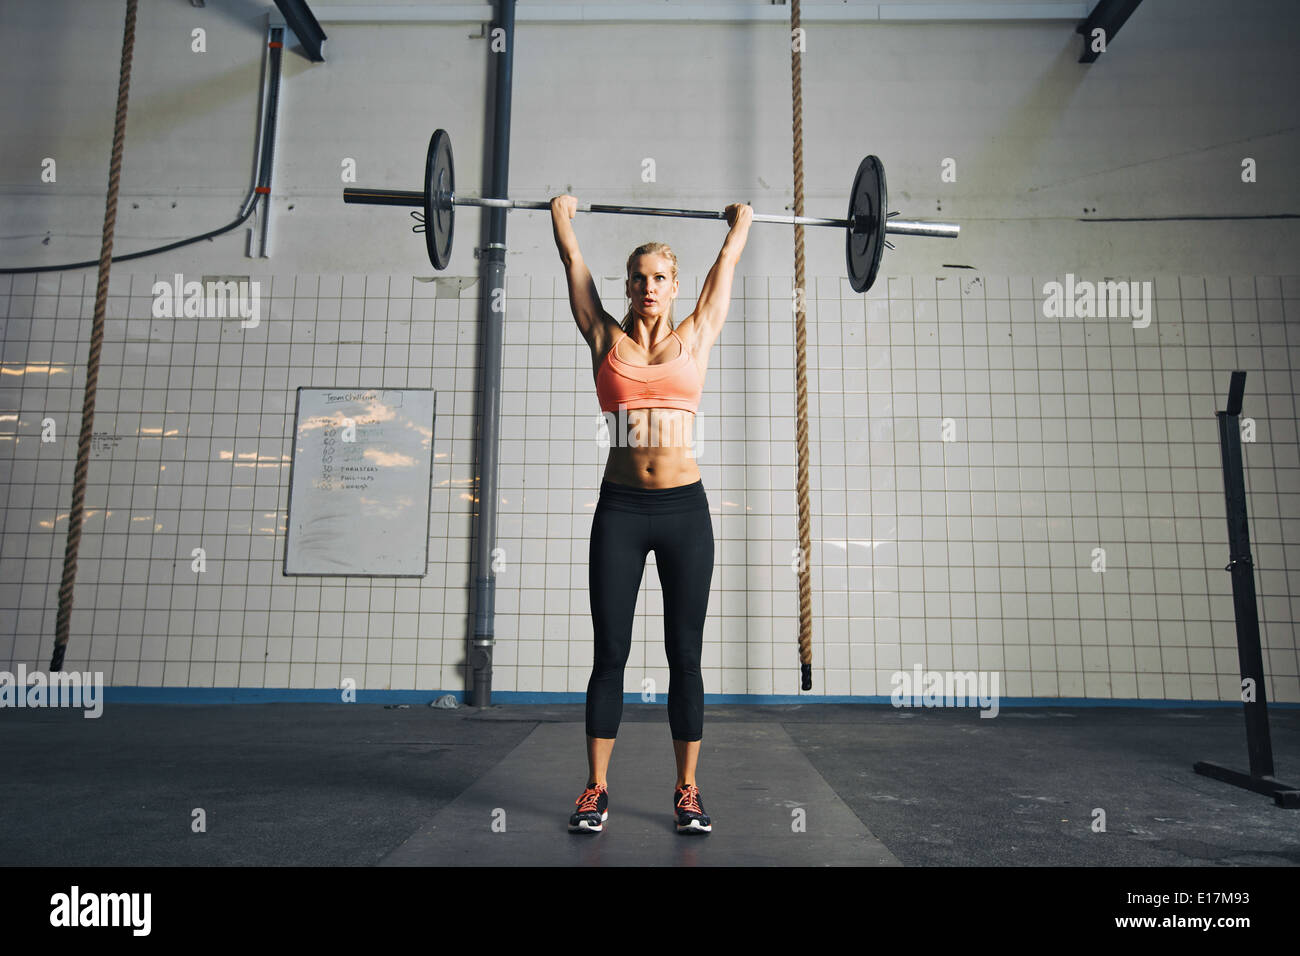 Full length image of strong young woman with barbell and weight plates overhead doing crossfit exercise. Fit female athlete. Stock Photo